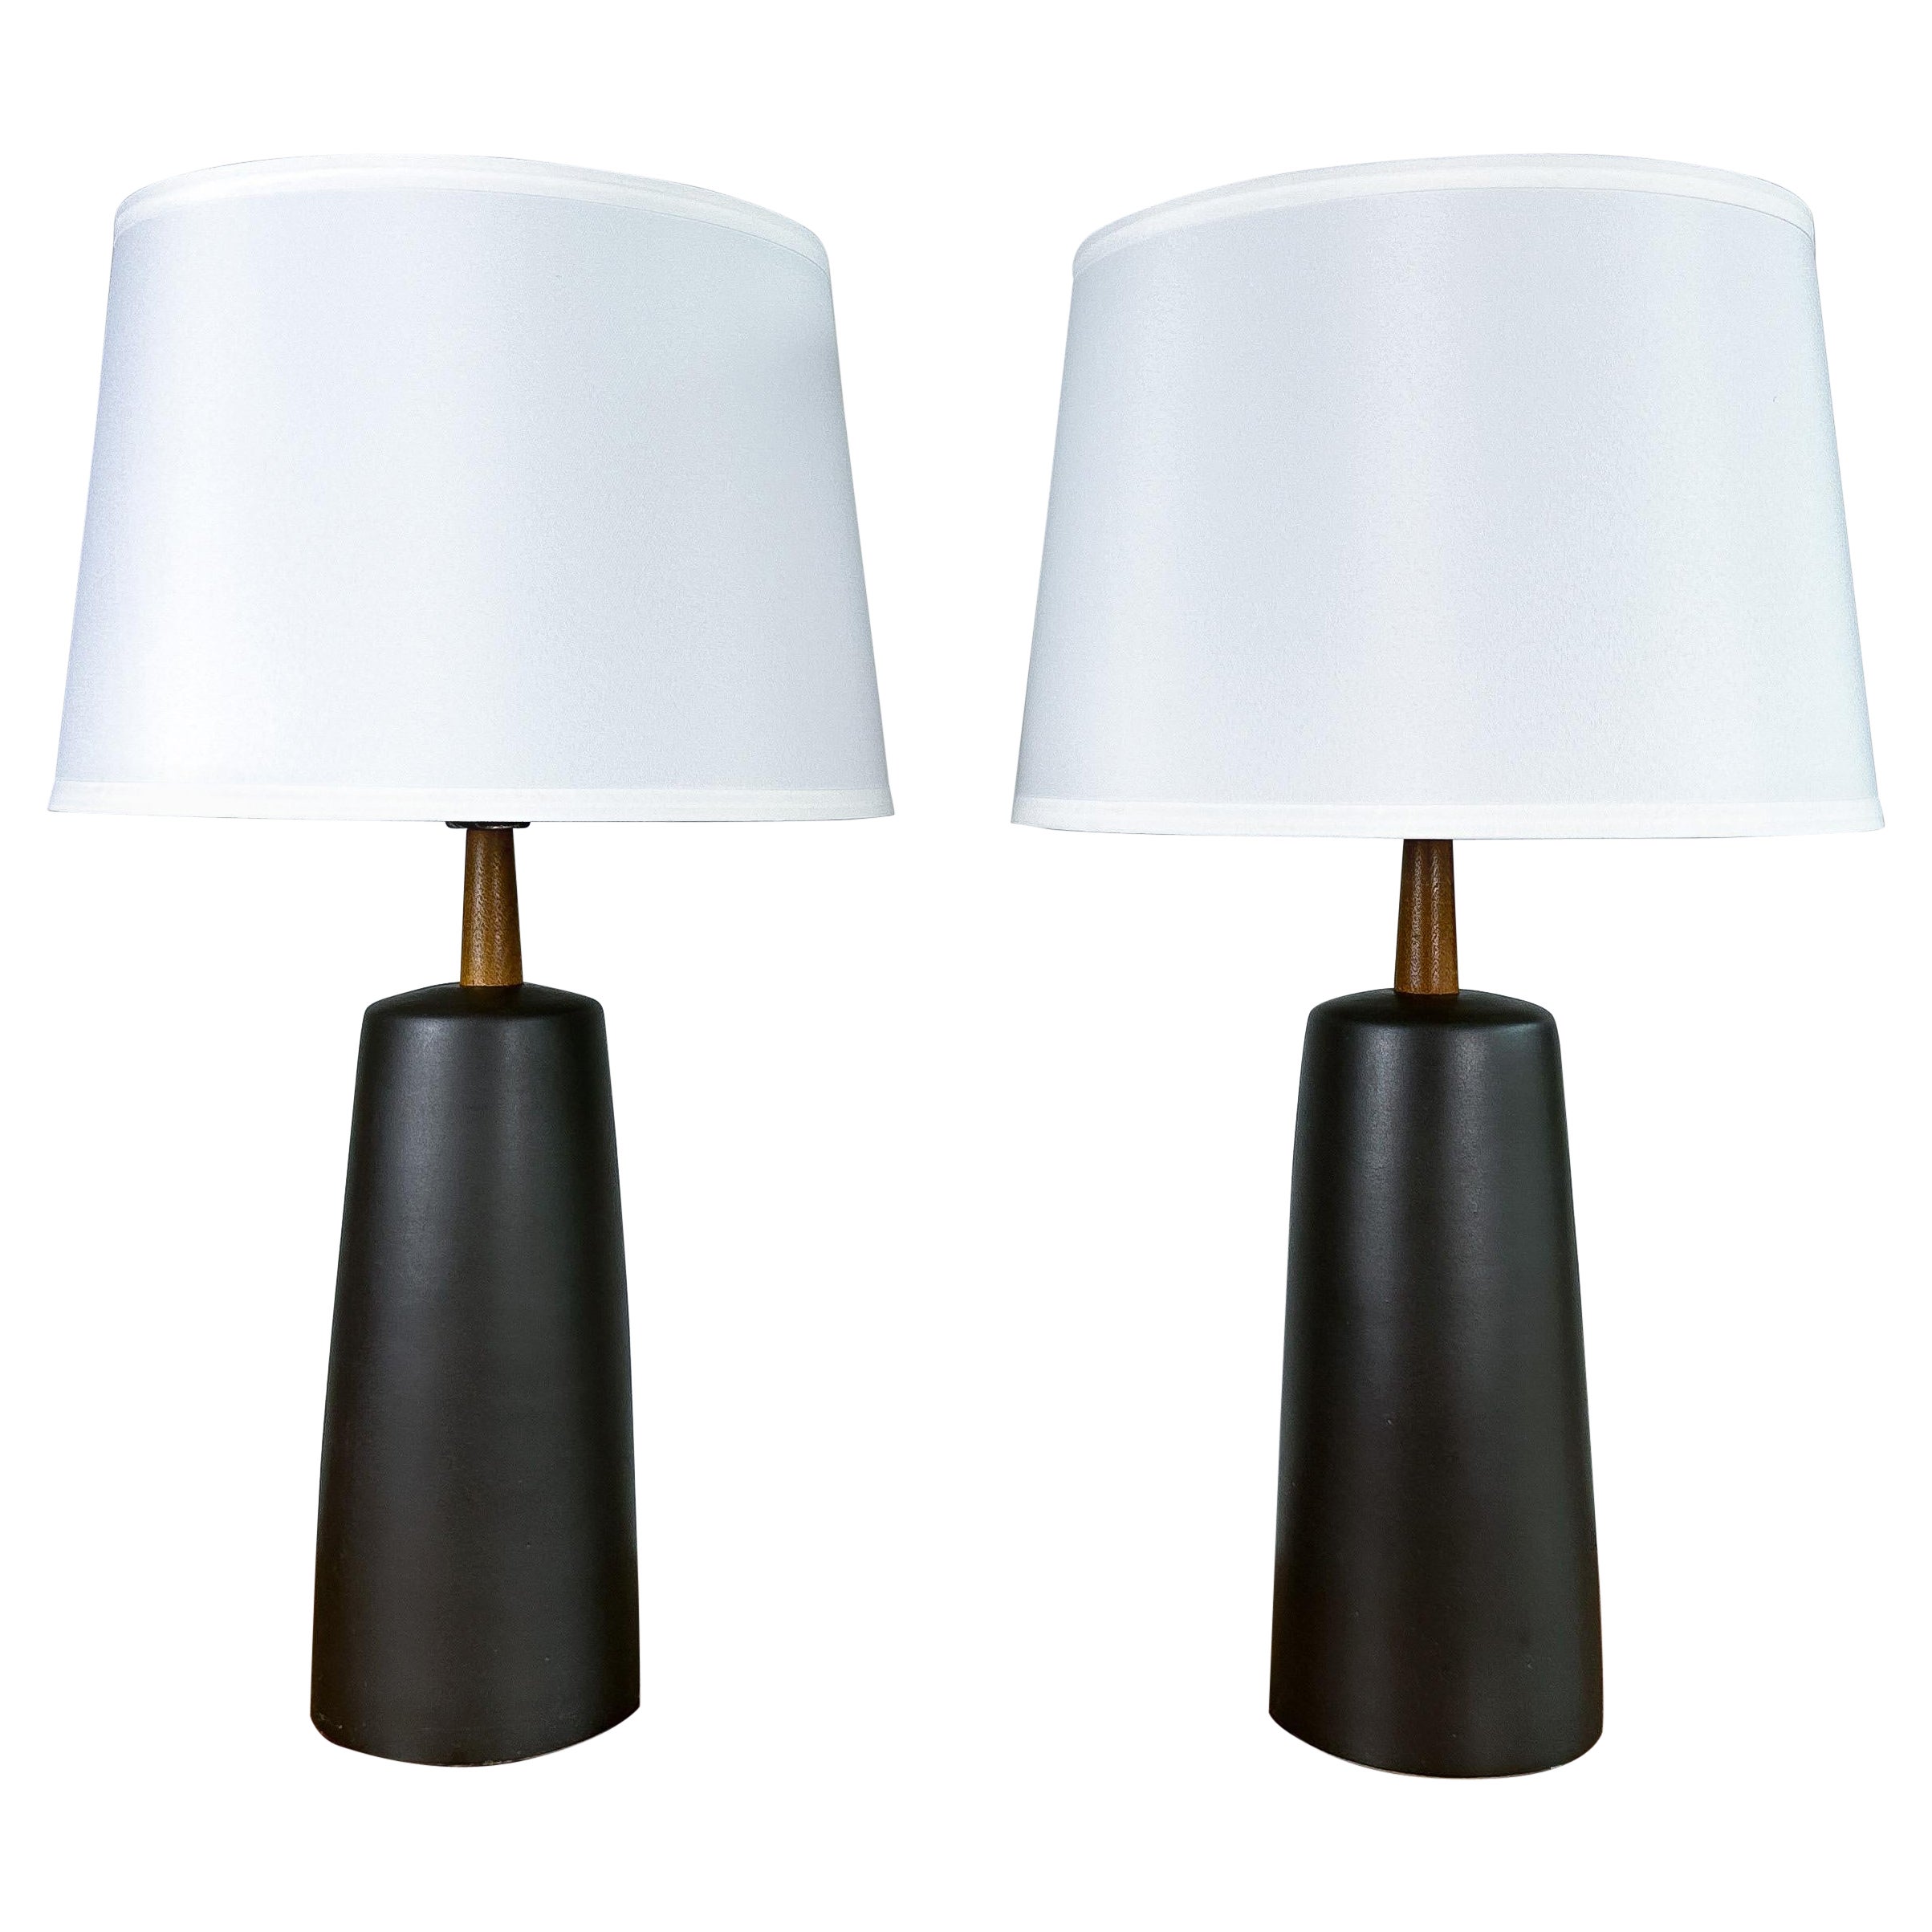 Martz Glazed Ceramic Table Lamps, Marshall Studios, 1960s, a Pair For Sale